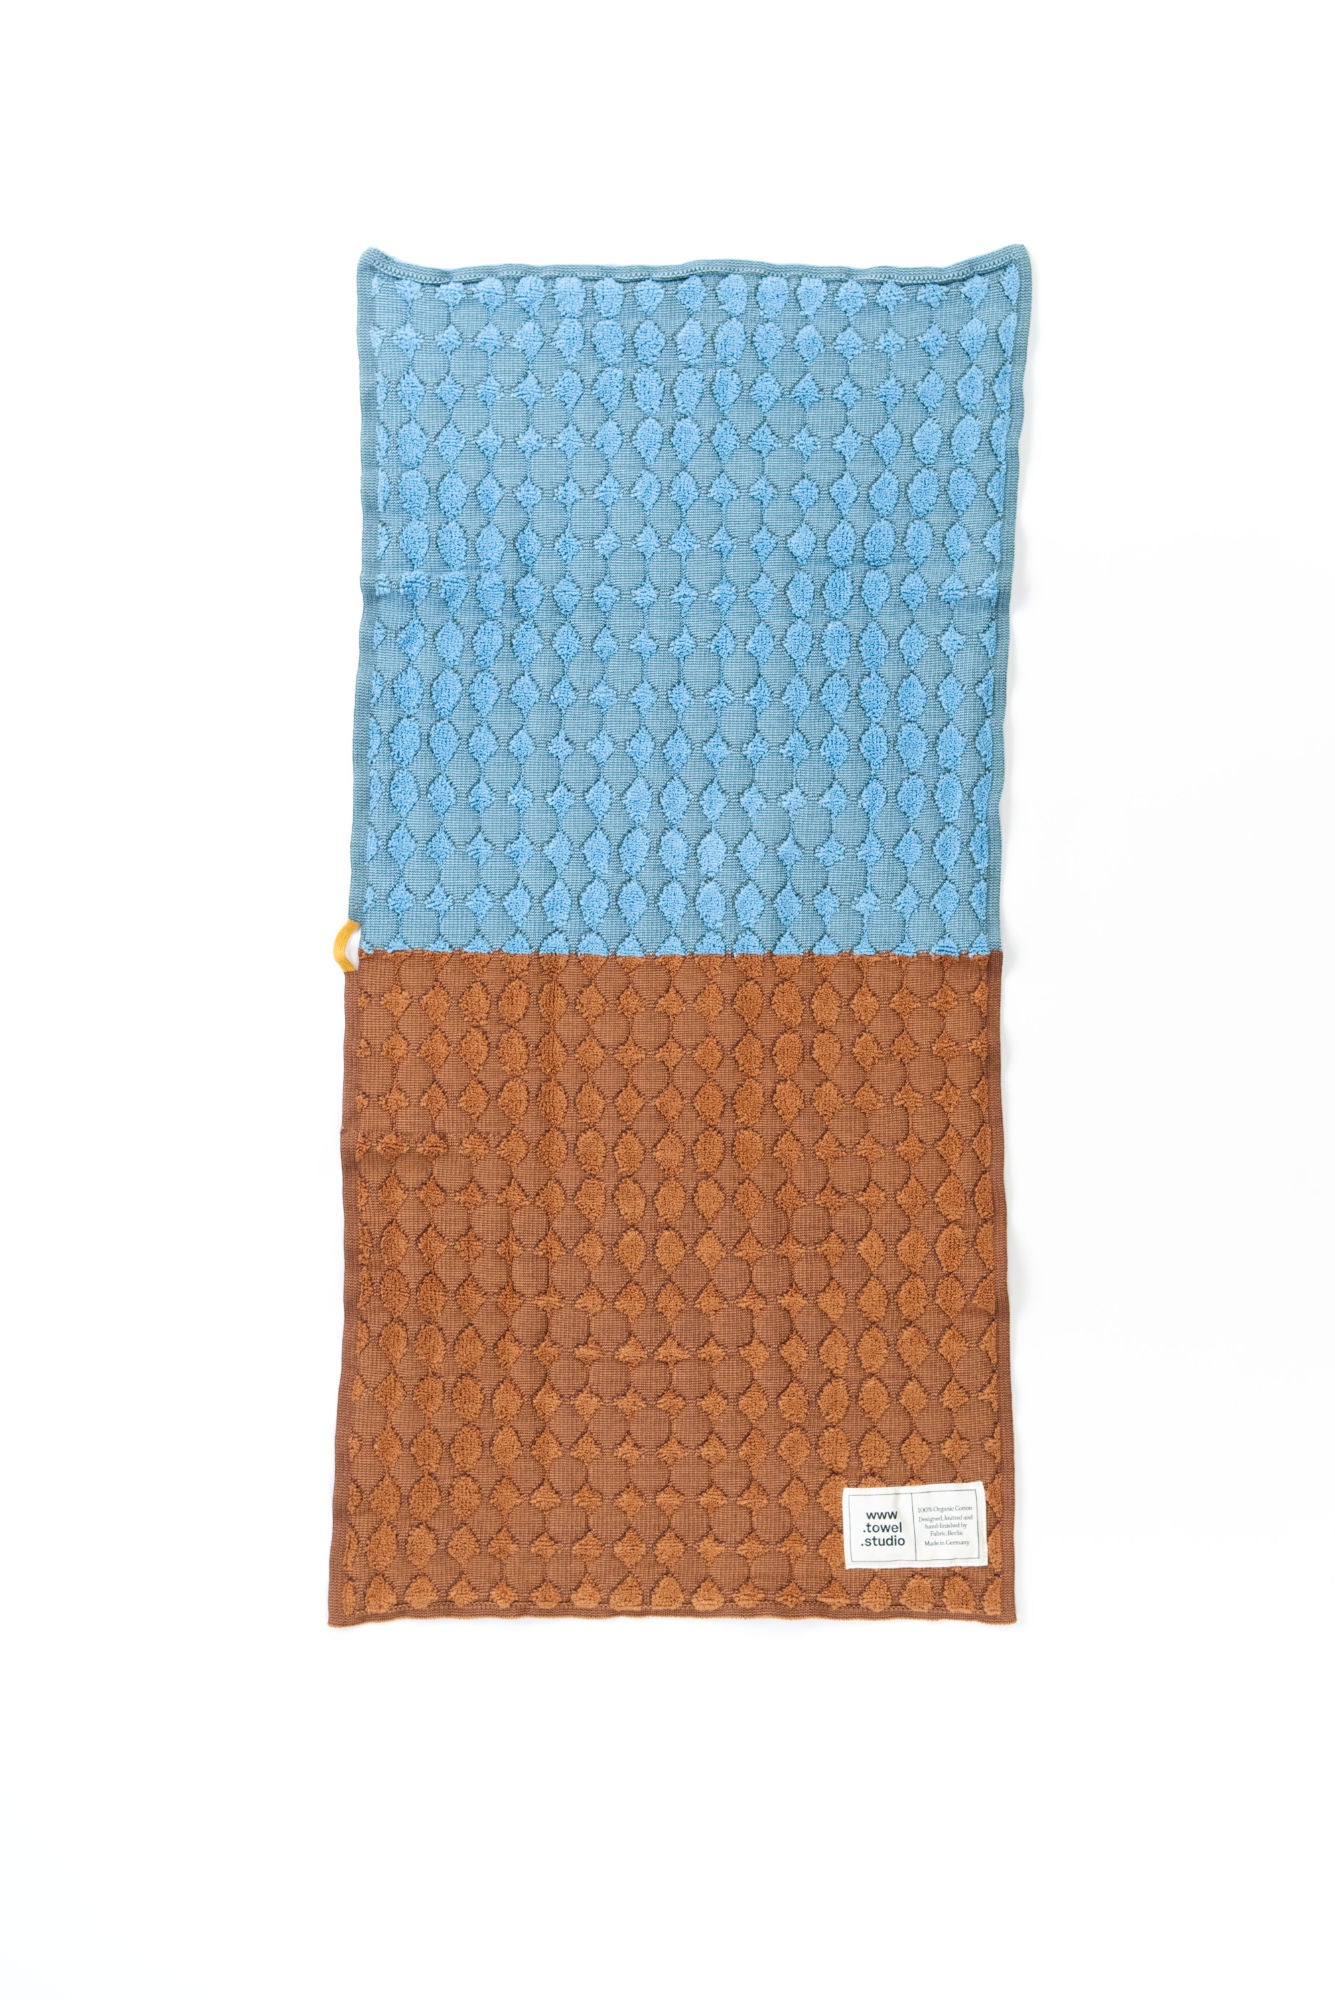 Pond Towel in Cocoa Teal